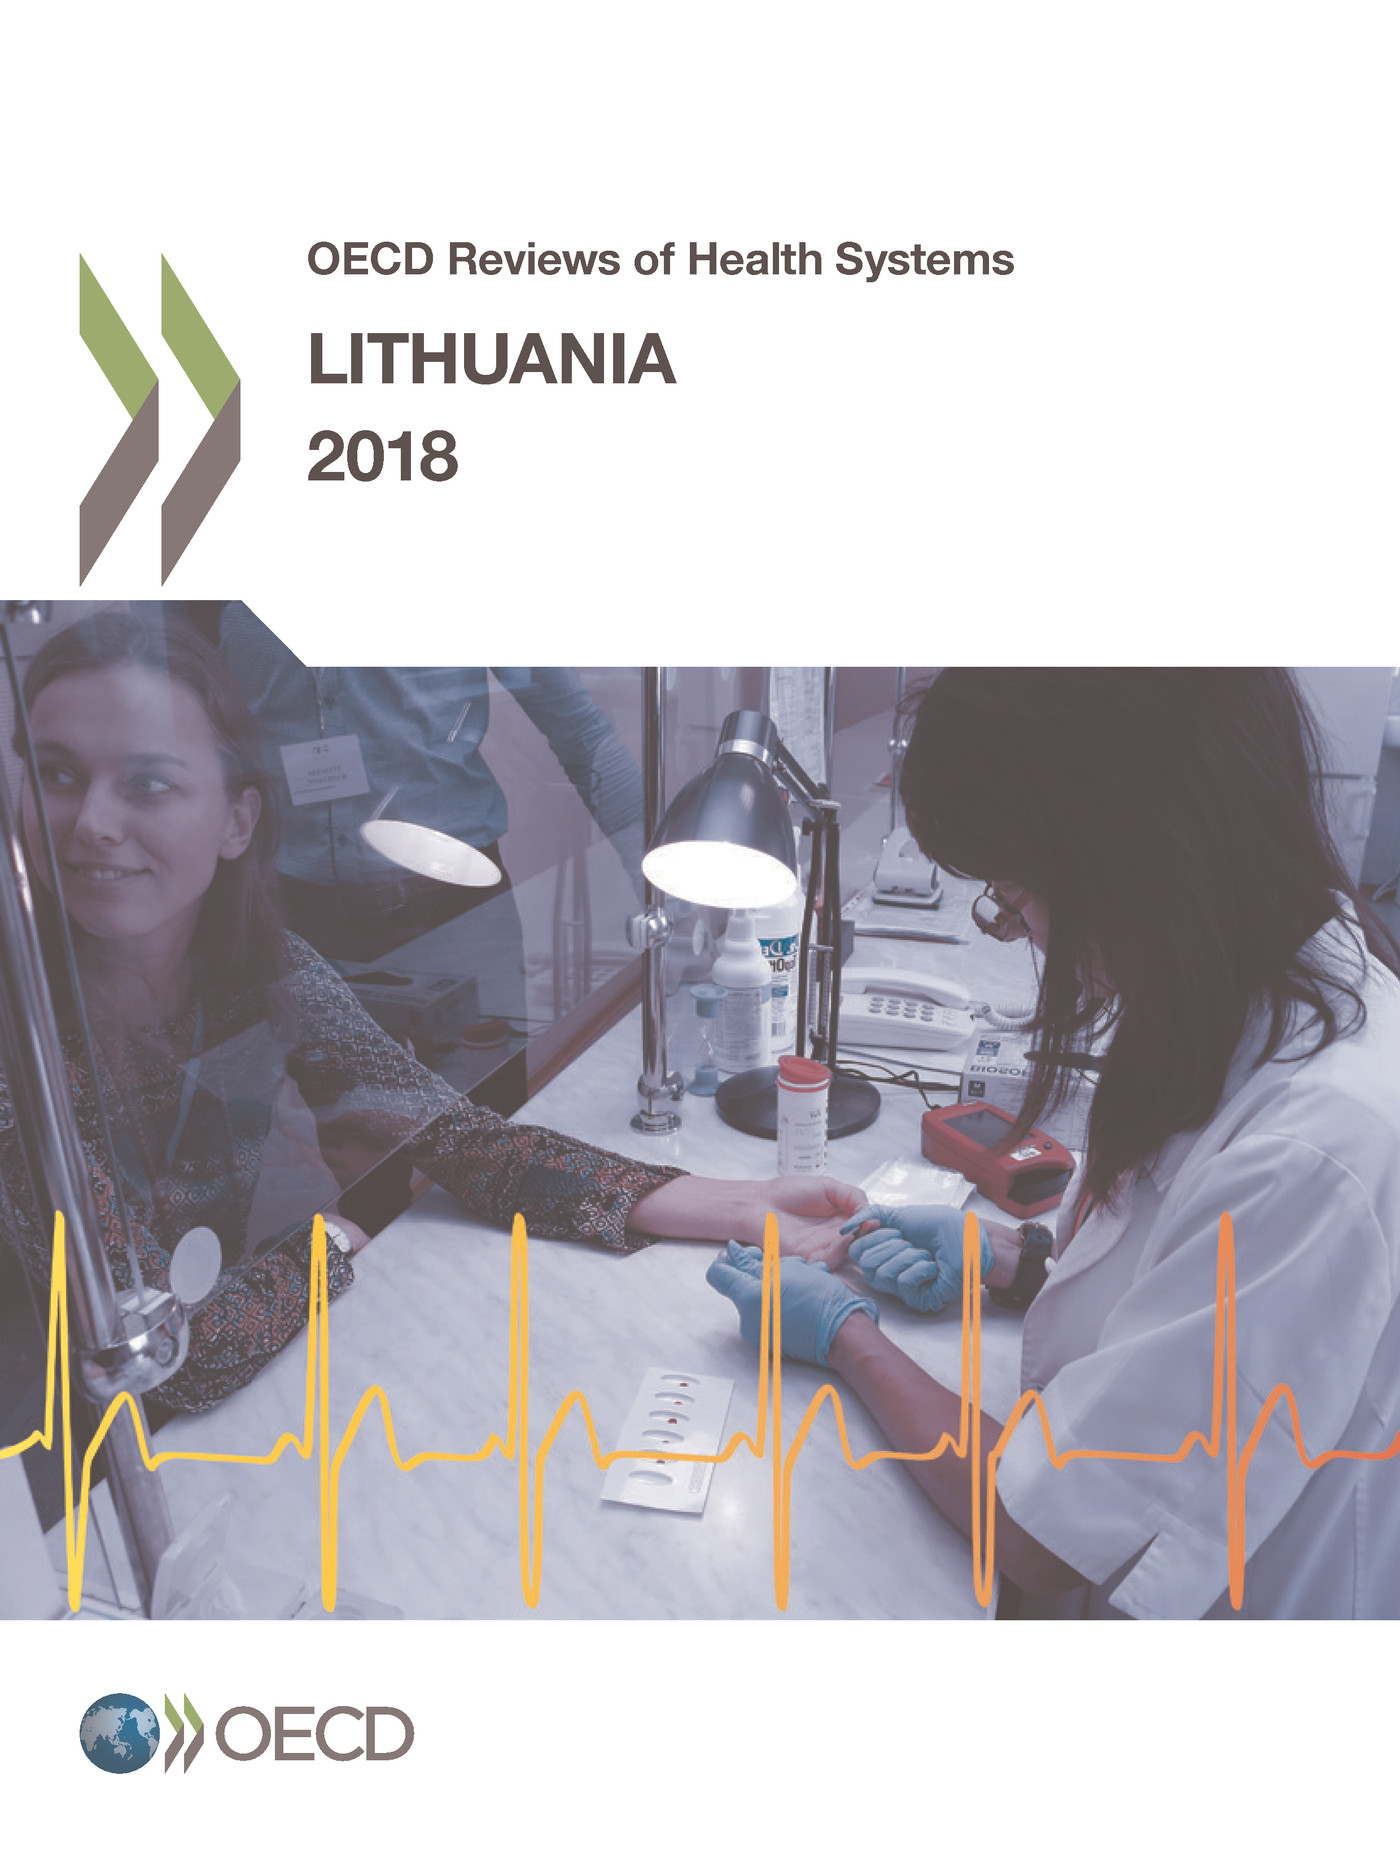 OECD Reviews of Health Systems: Lithuania 2018 -  Collectif - OCDE / OECD